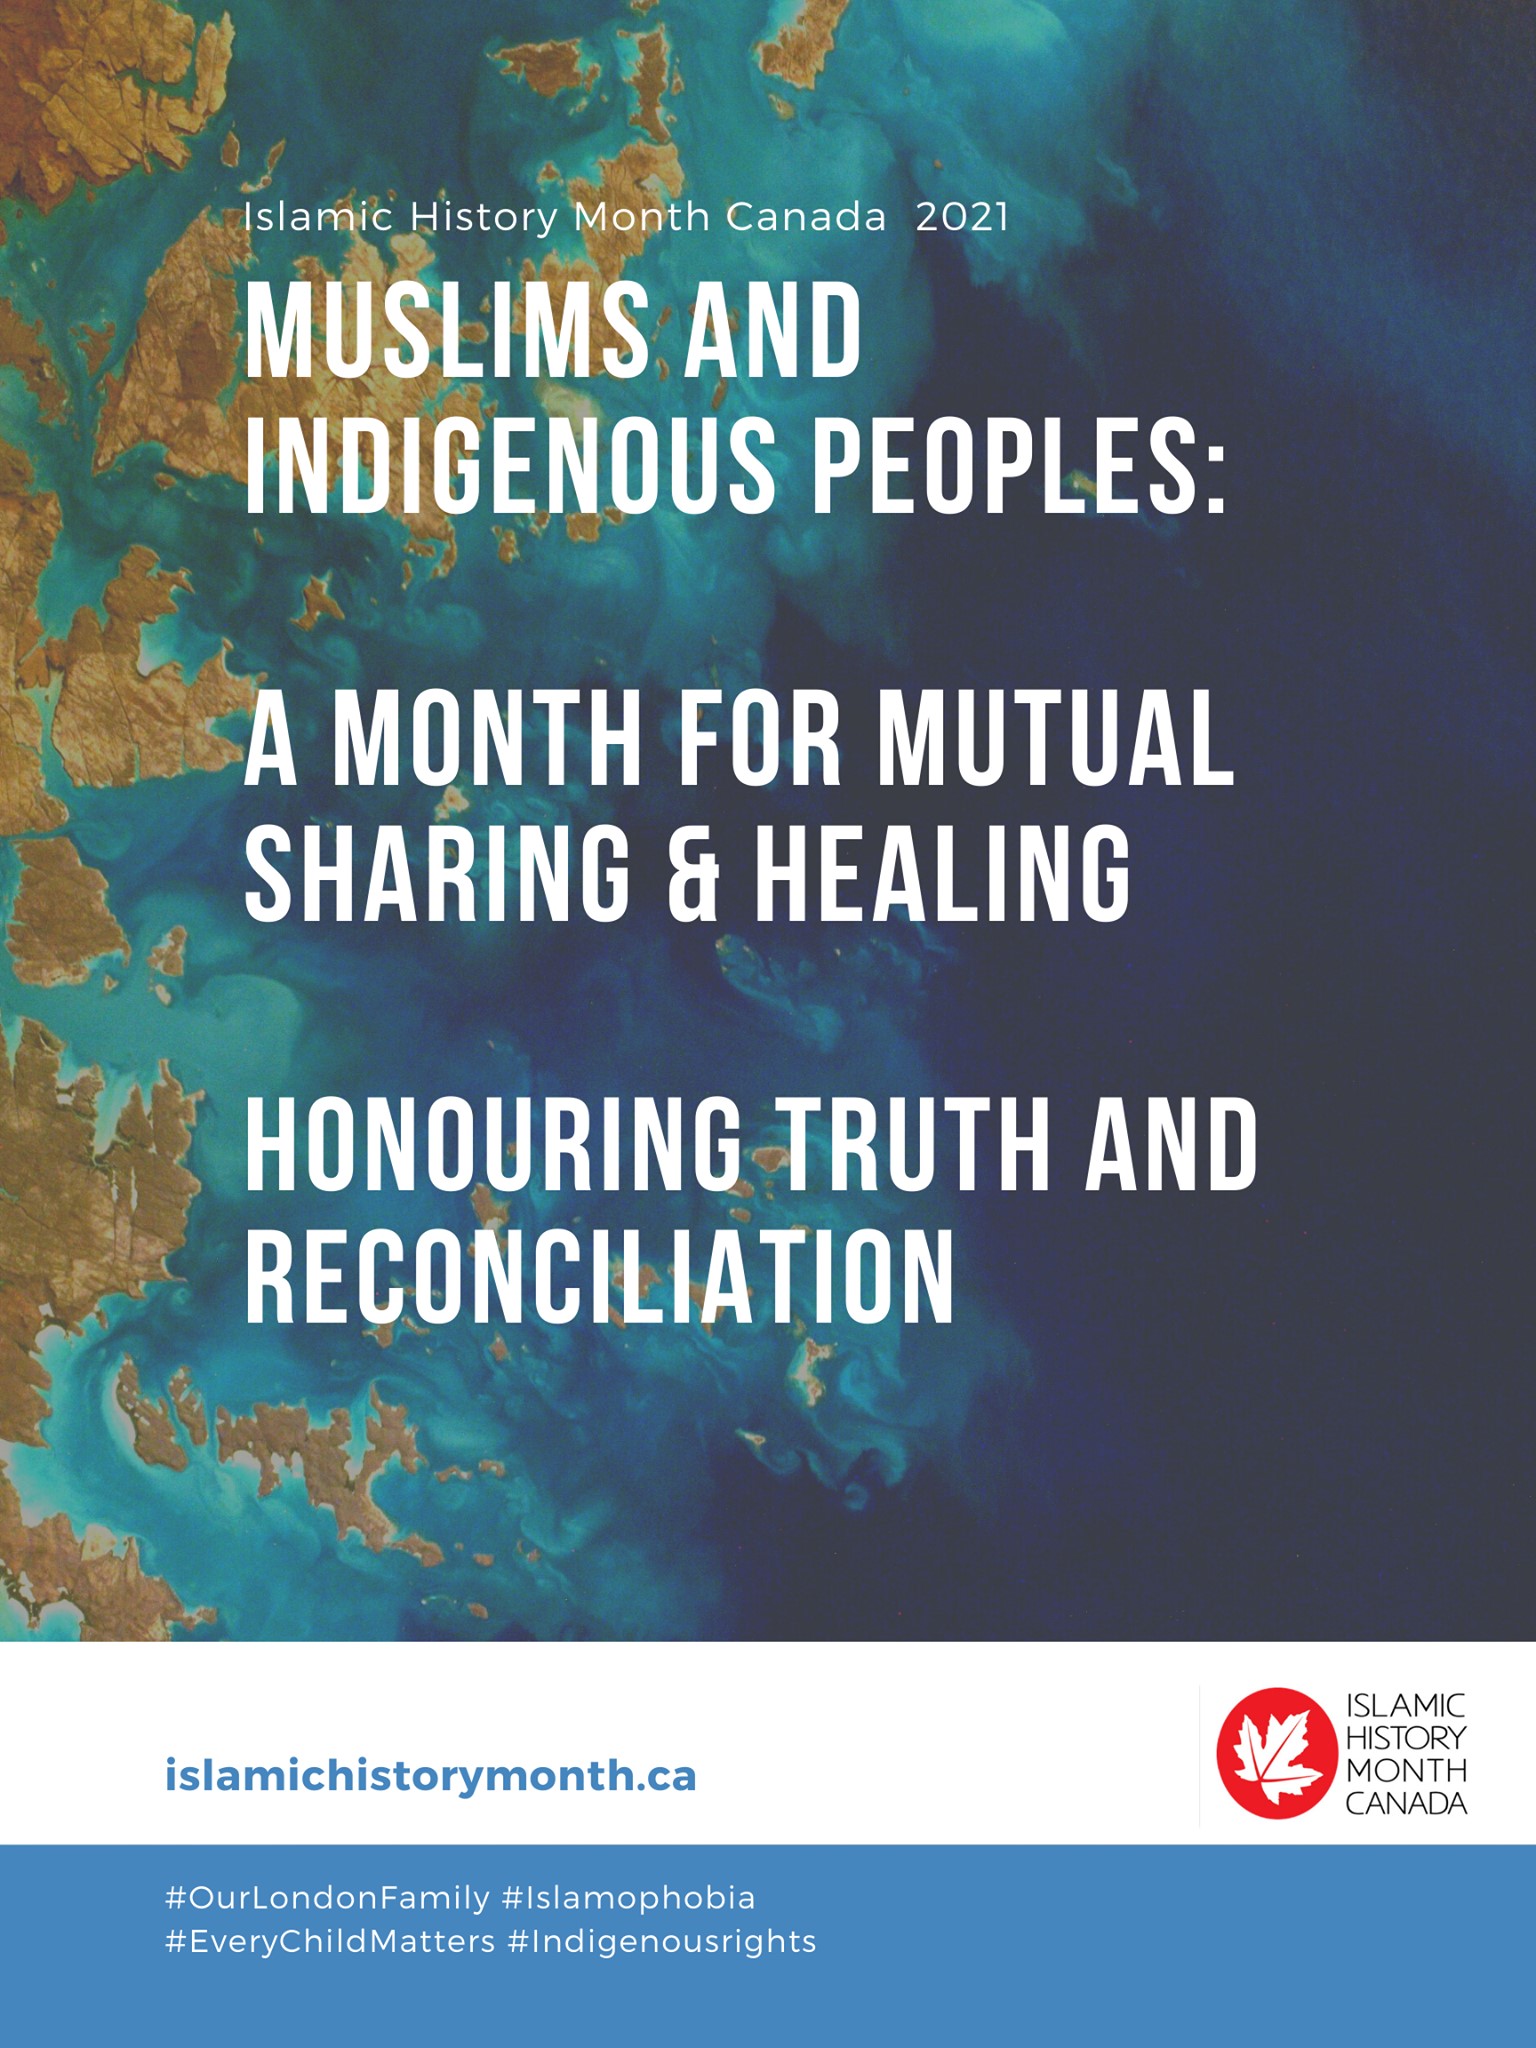 Islamic History Month Canada 2021 poster (by kind permission of Islamic History Month Canada, Kingston)